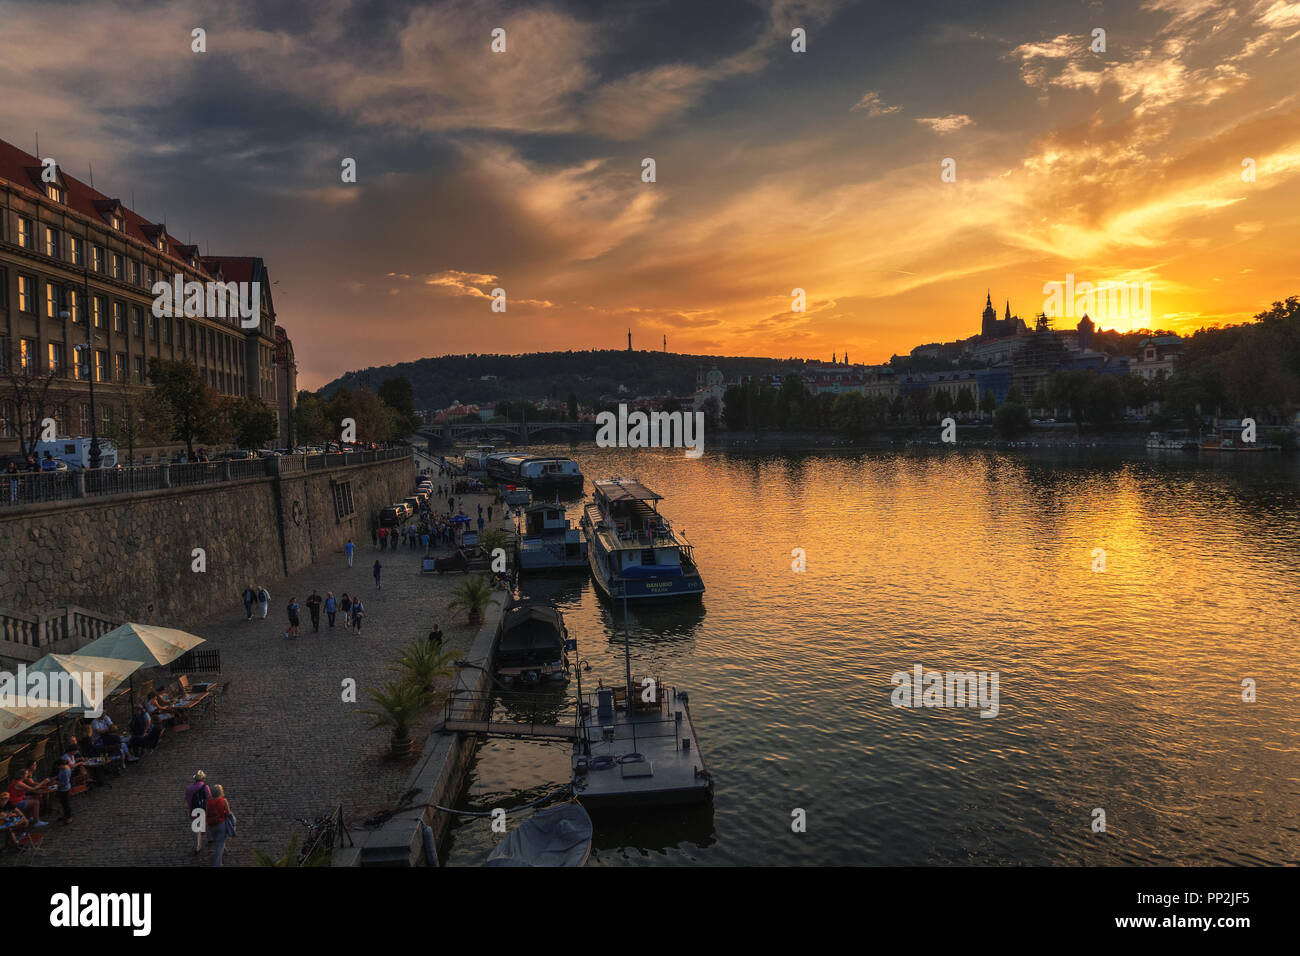 Prague, Czechia - September 19, 2018 : People walk along the Vltava river on the paved river bank known as Naplavka with boats, restaurants and views  Stock Photo